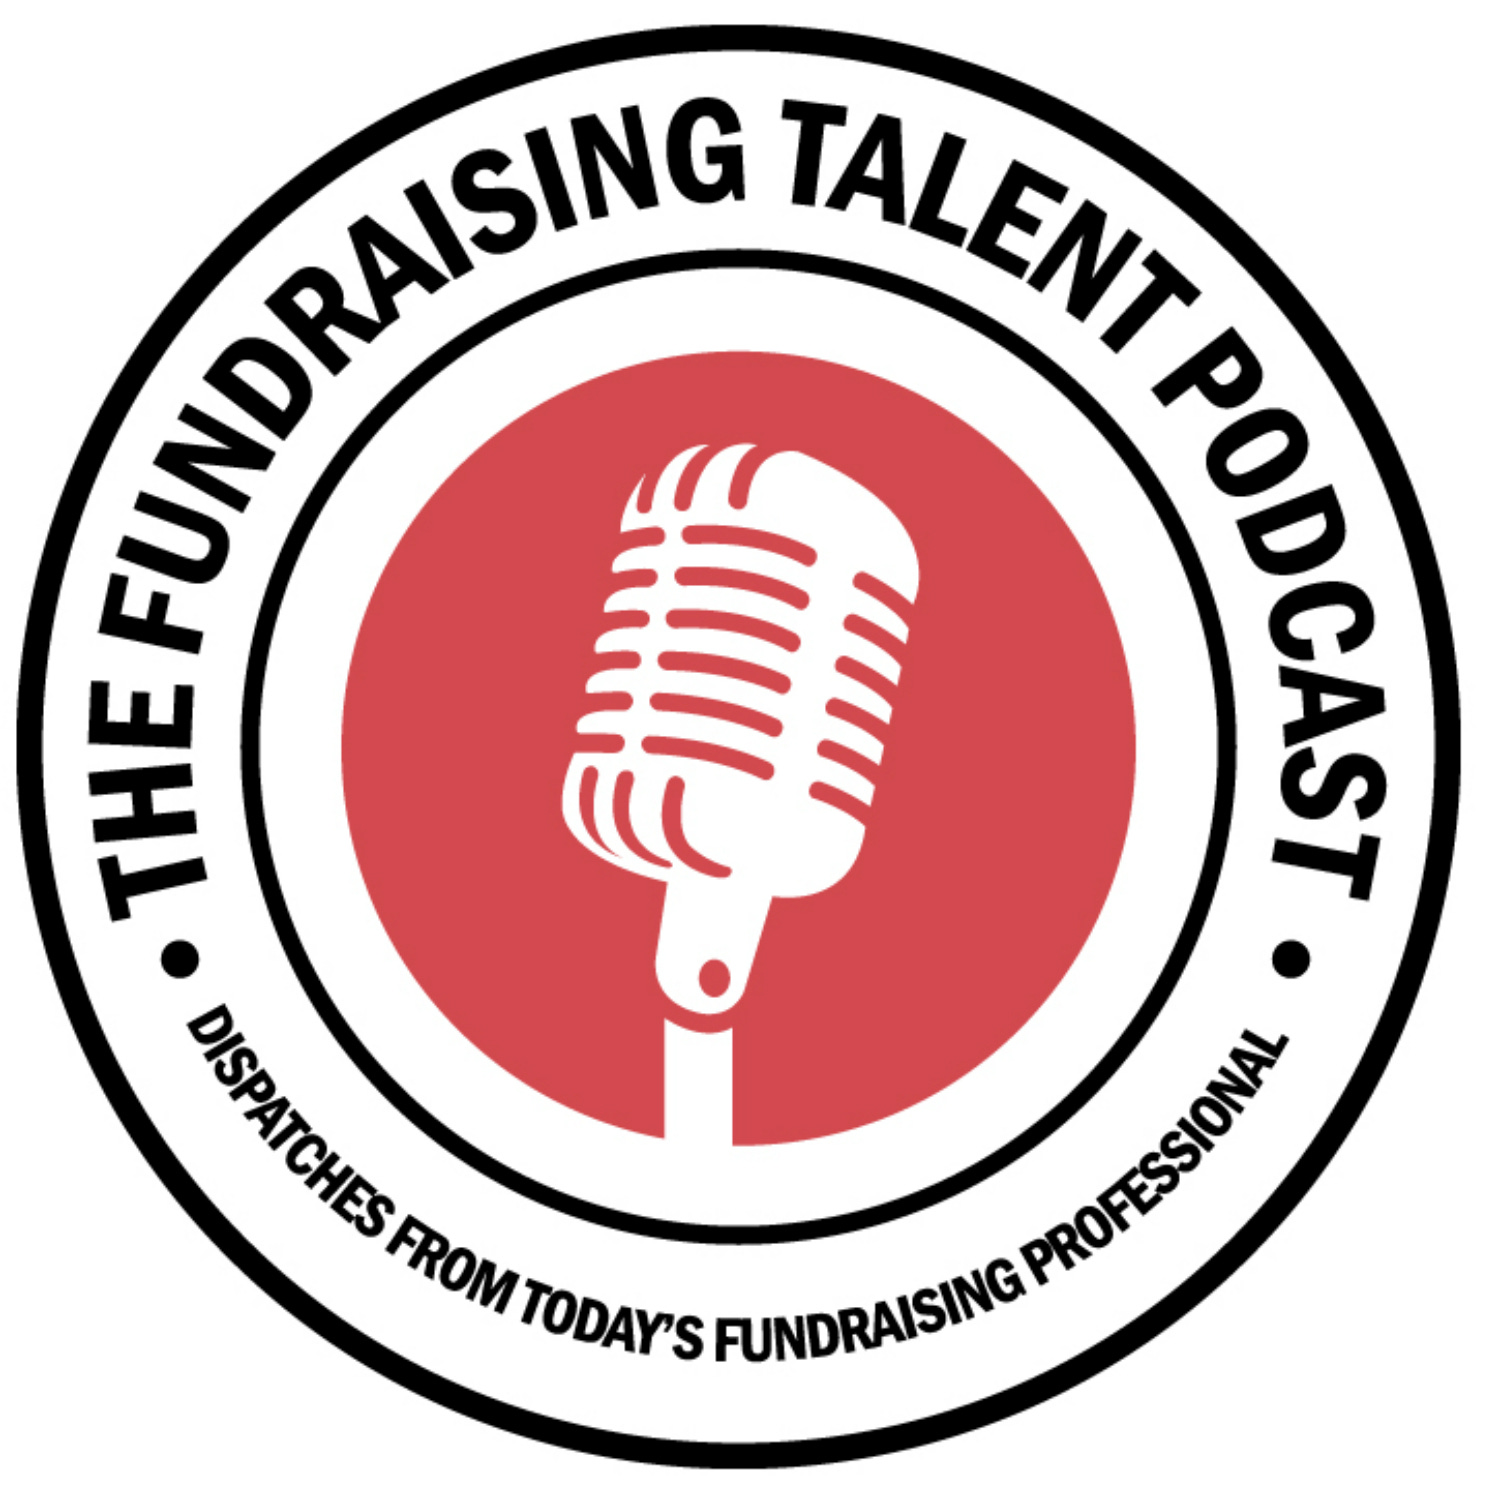 Are we using the wrong approach for retaining fundraising talent?